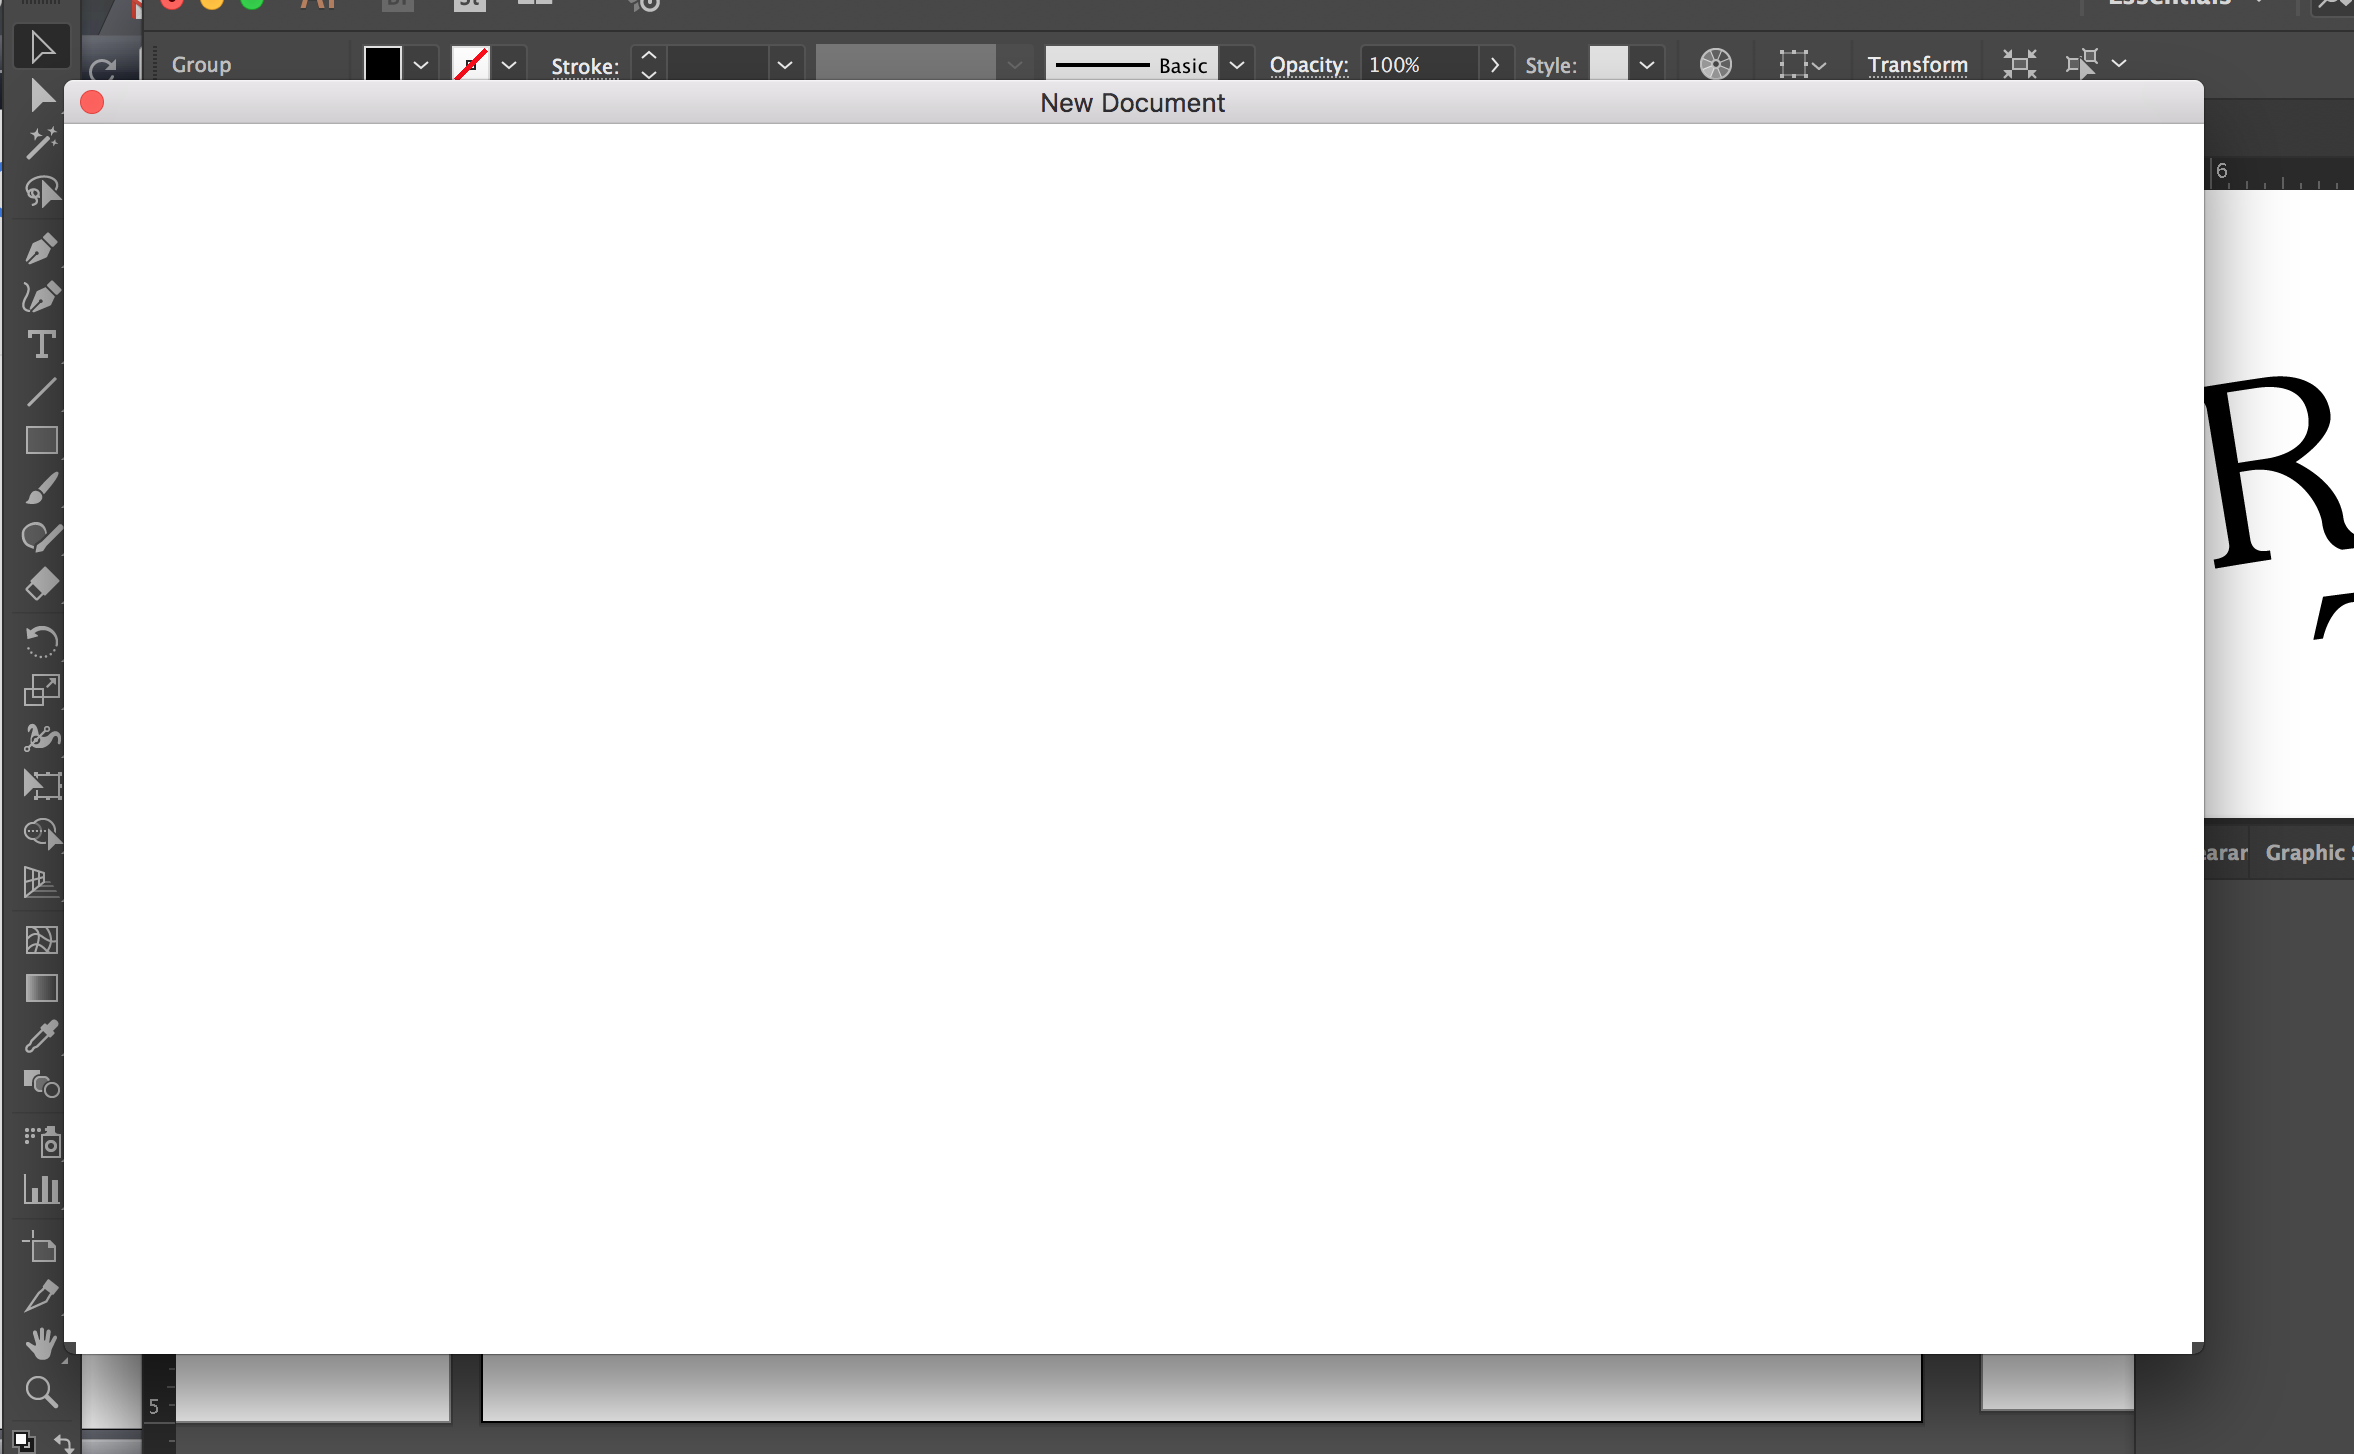 adobe download manager window is blank